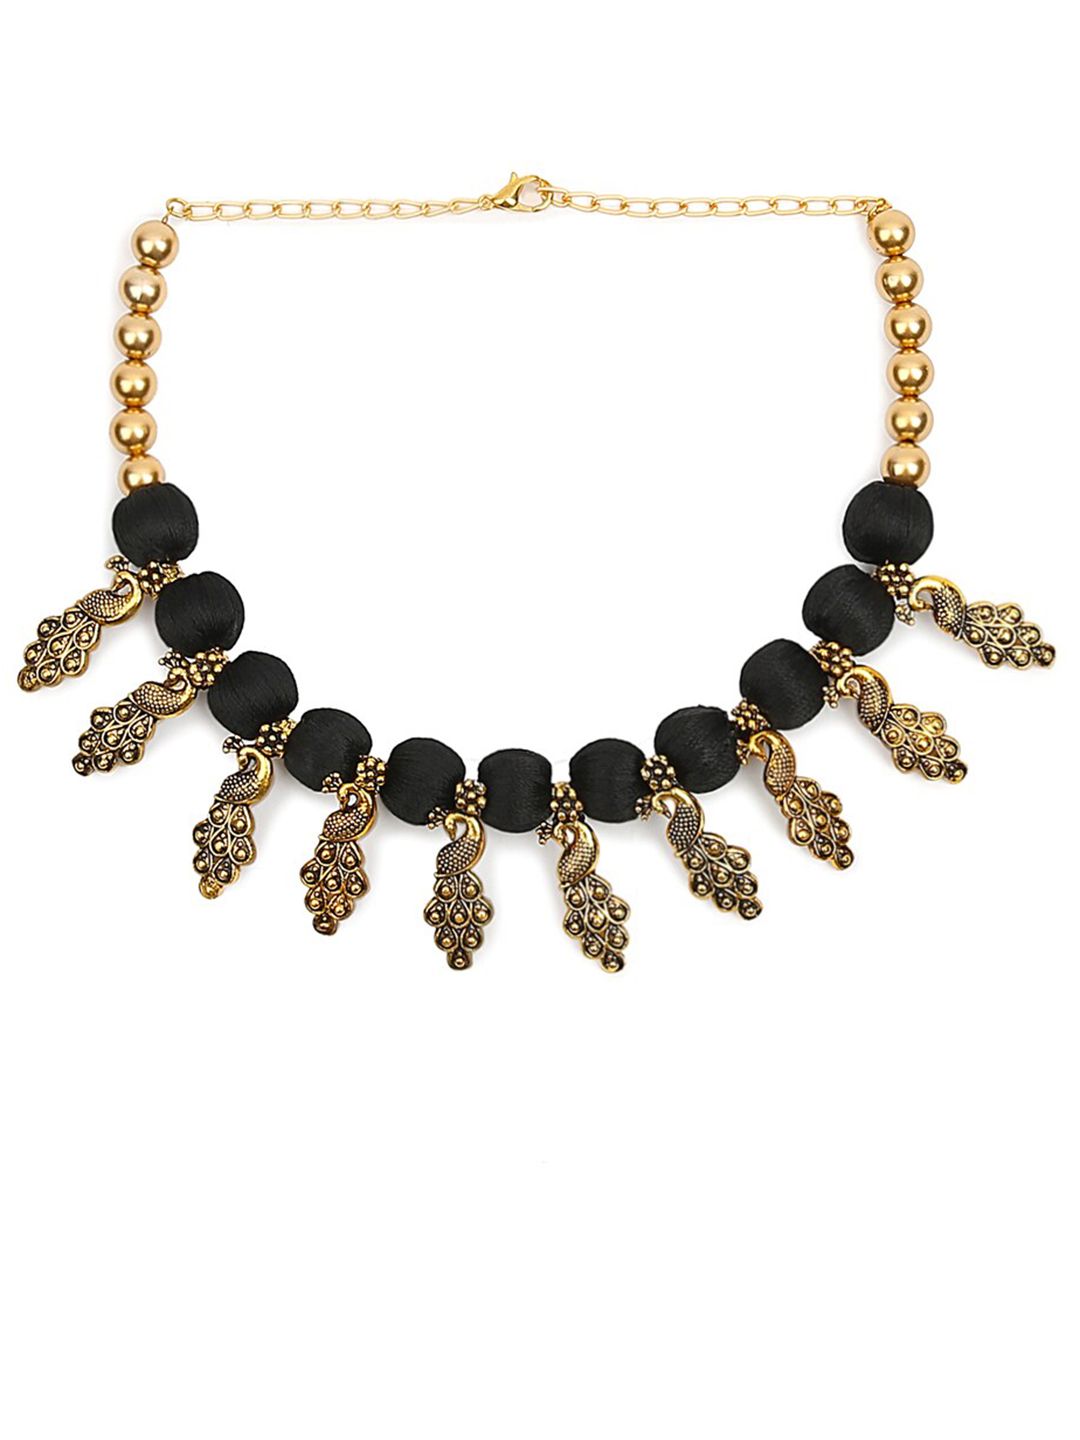 AKSHARA Gold-Toned & Black Choker Necklace Price in India